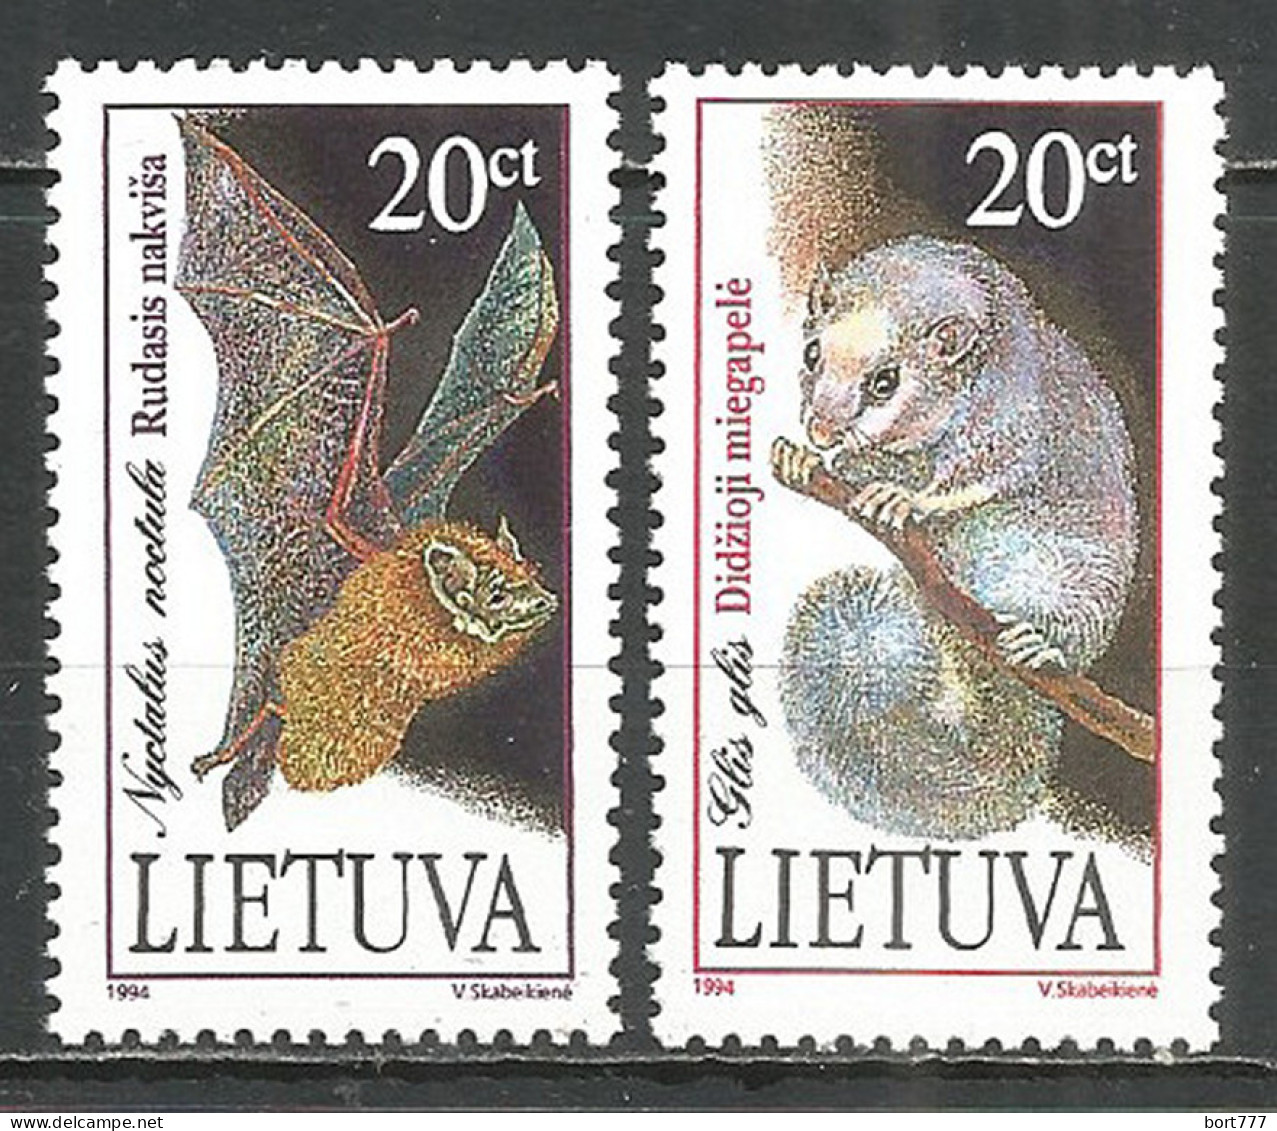 Lithuania 1994 Year Mint Stamps MNH (**) - Lithuania